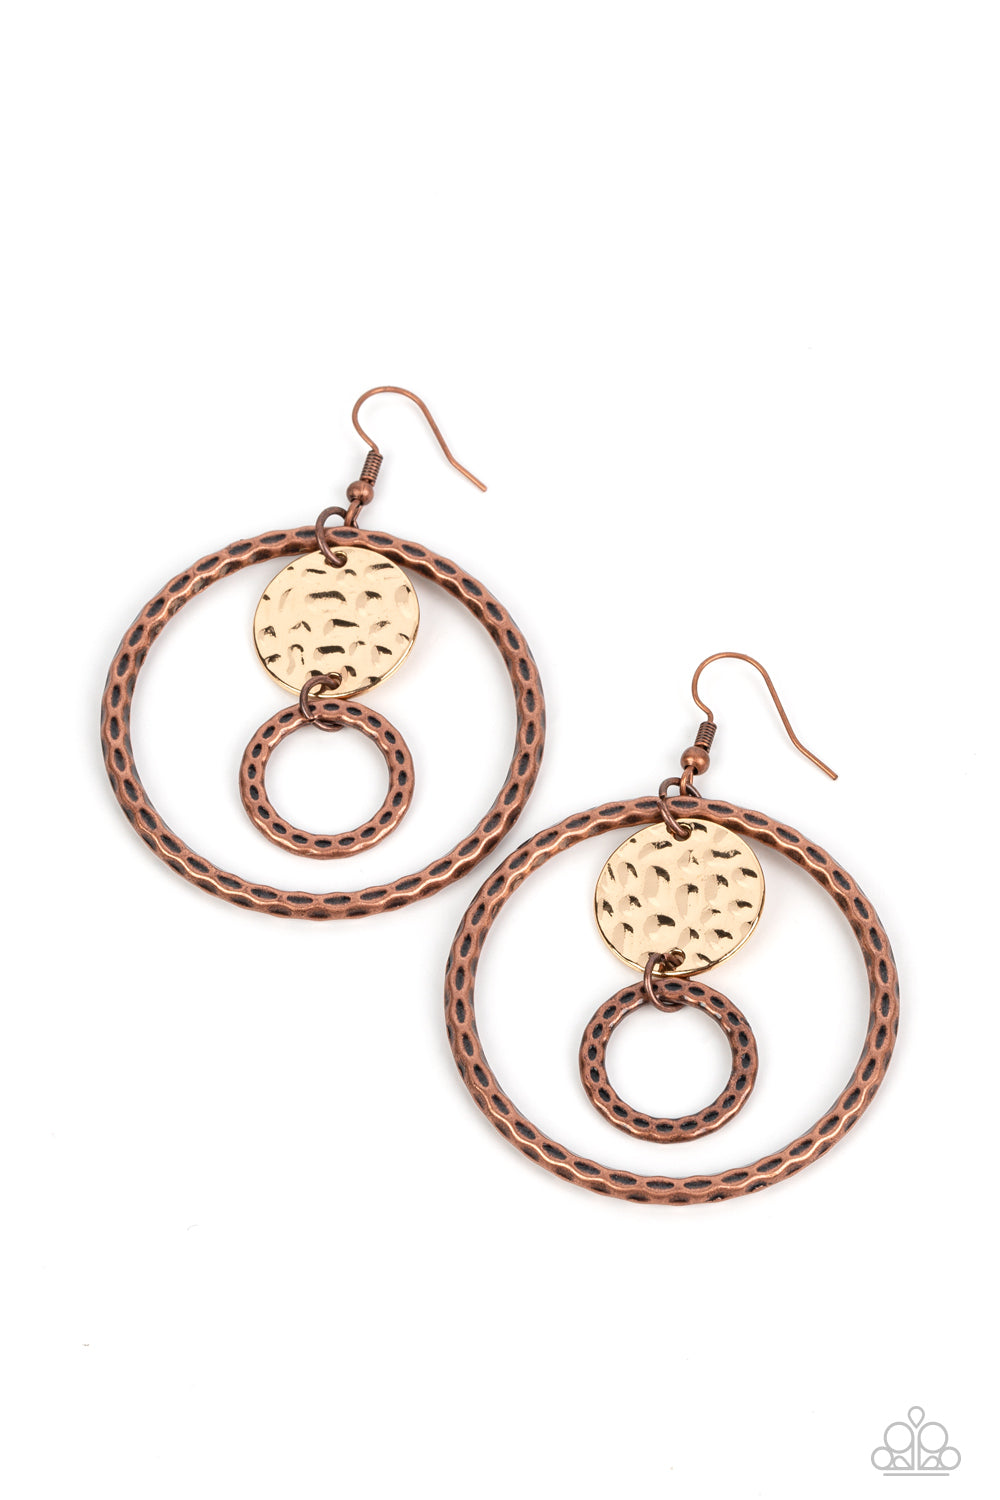 Paparazzi Accessories Mojave Metal Art - Multi A hammered gold disc and a hammered copper ring swing from the top of an oversized copper hoop featuring the same textured detail, resulting in a rustic chandelier. Earring attaches to a standard fishhook fit